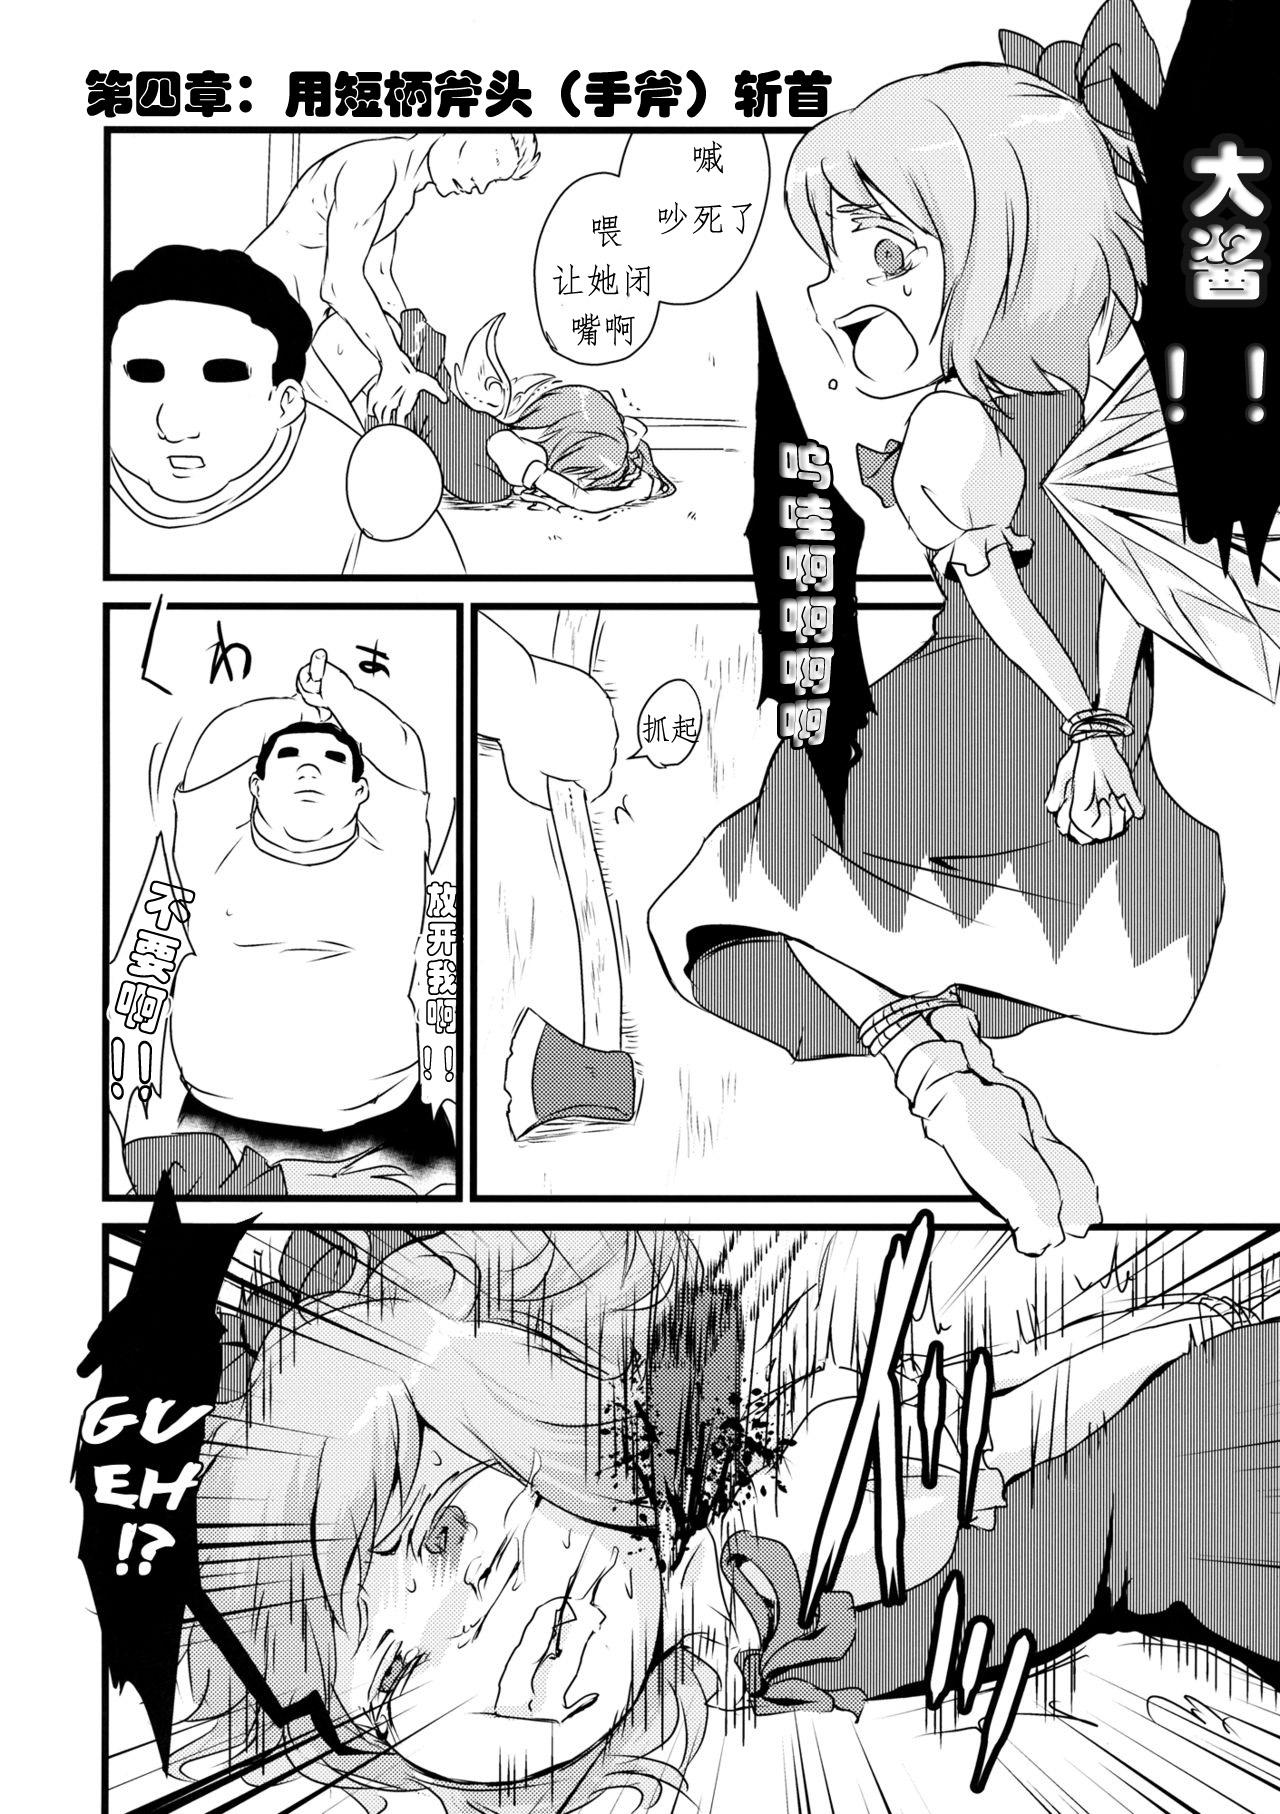 Blackmail 2P de Shinu Hon | The Dying In 2P Book - Touhou project Interracial Sex - Page 10